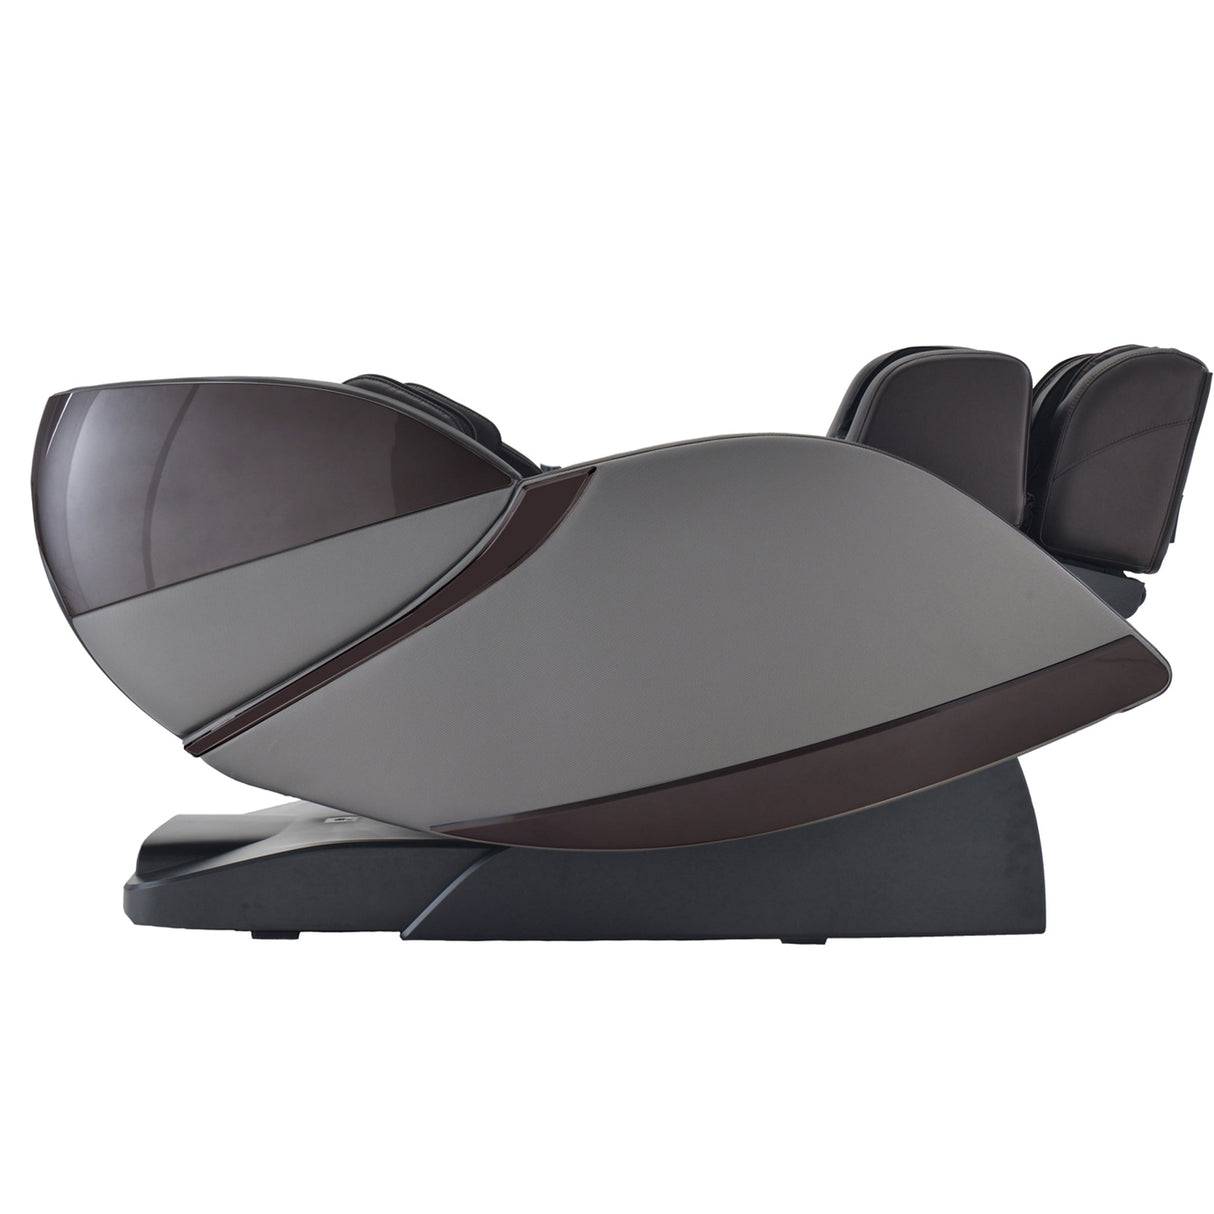 Infinity Evolution Massage Chair Certified Pre-Owned Model | Grade B - Pristine Home & Wellness